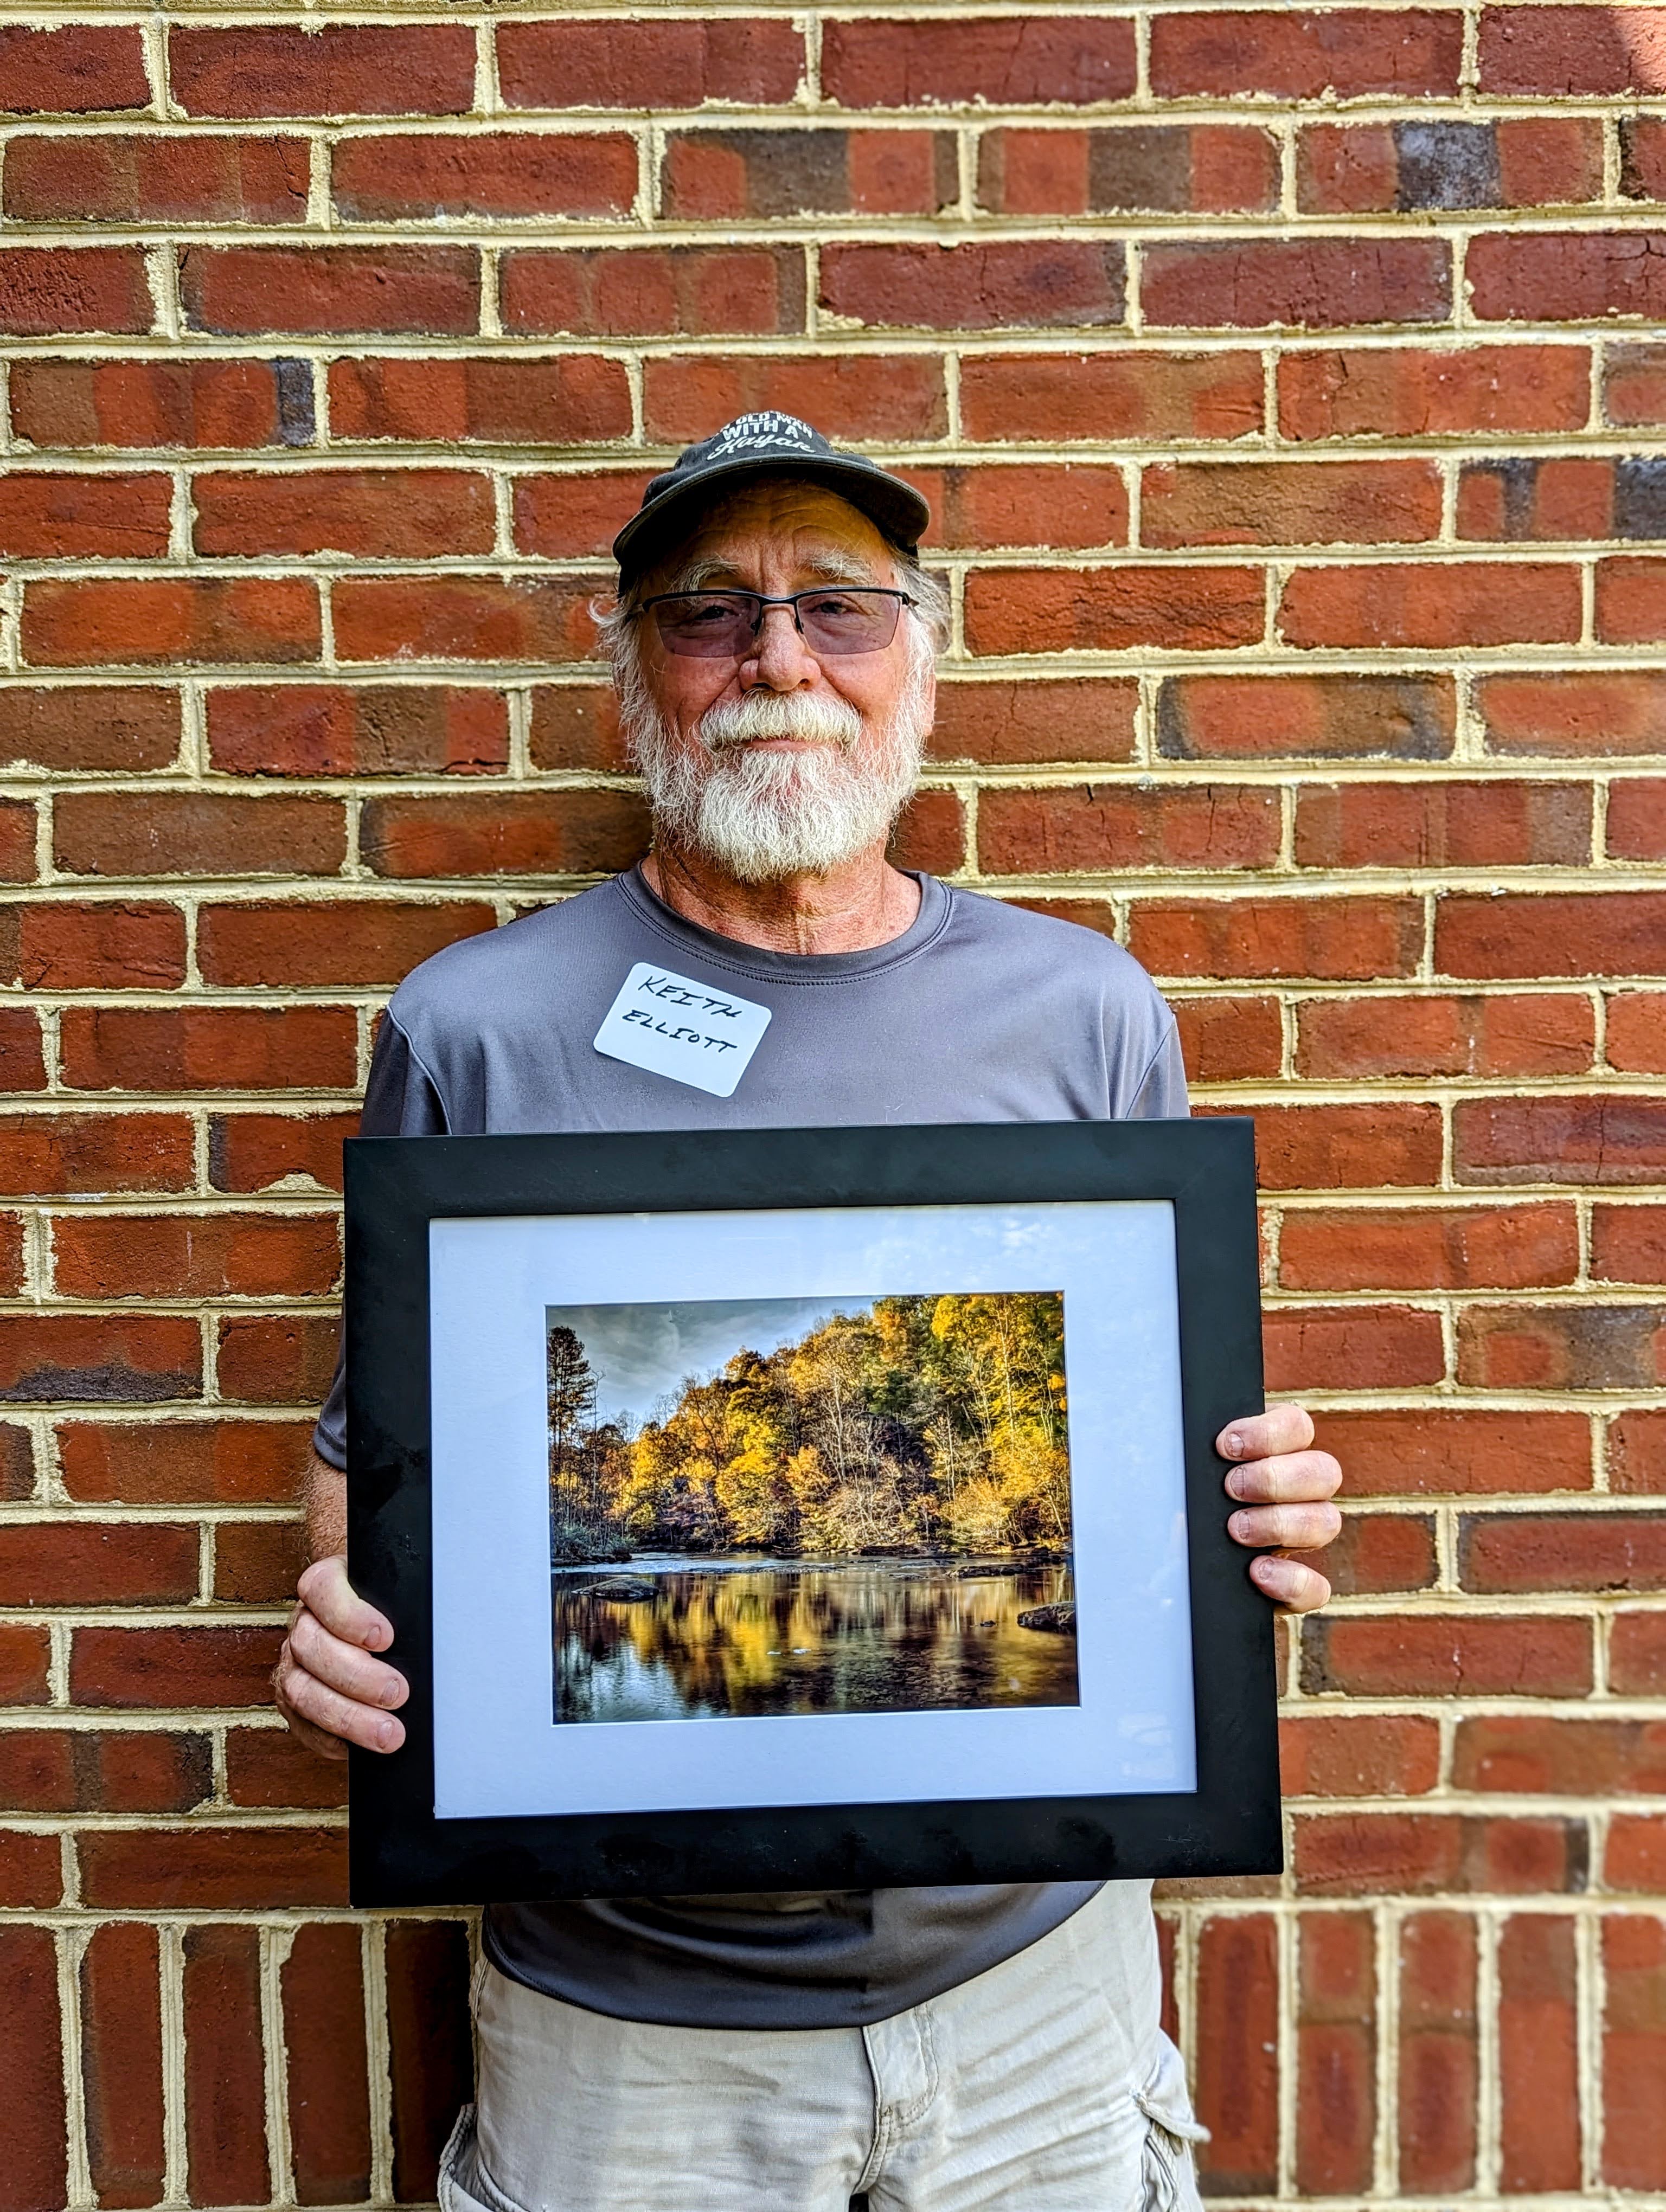 Keith, service to DRBA award, is presented a beautiful photo of the river in the fall